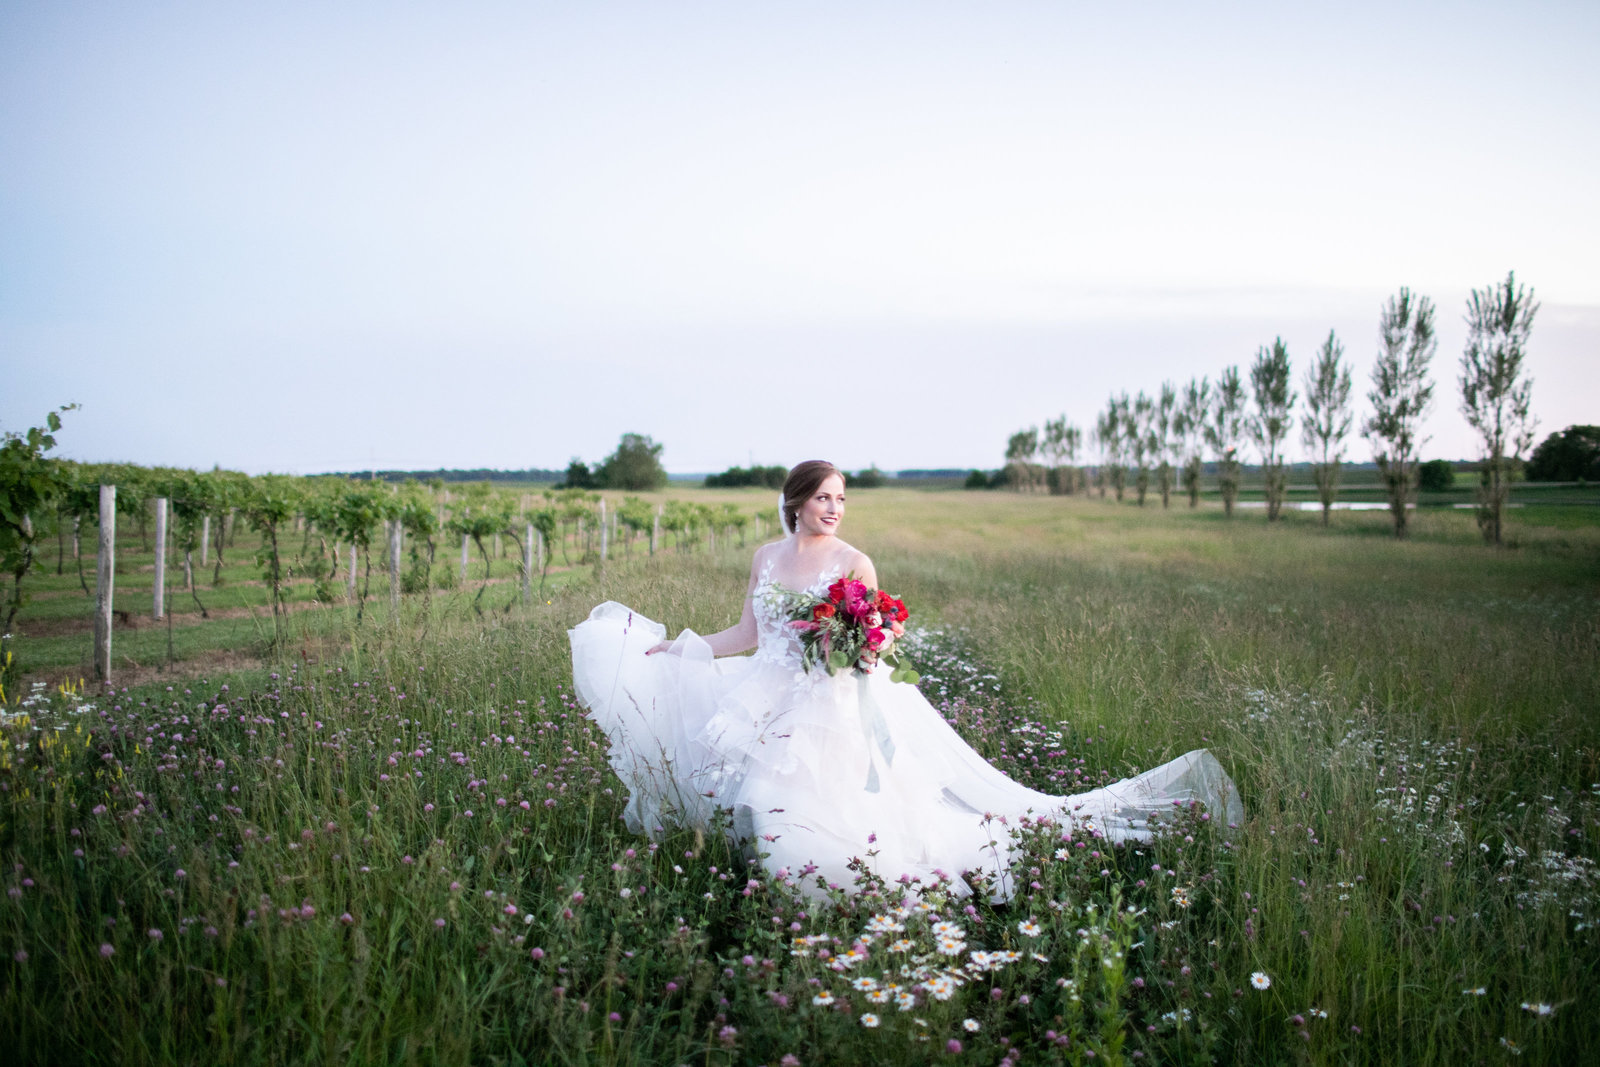 Beautiful bride in wedding gown holding colorful bouquet walking through fields at Providence Vineyard wedding venue